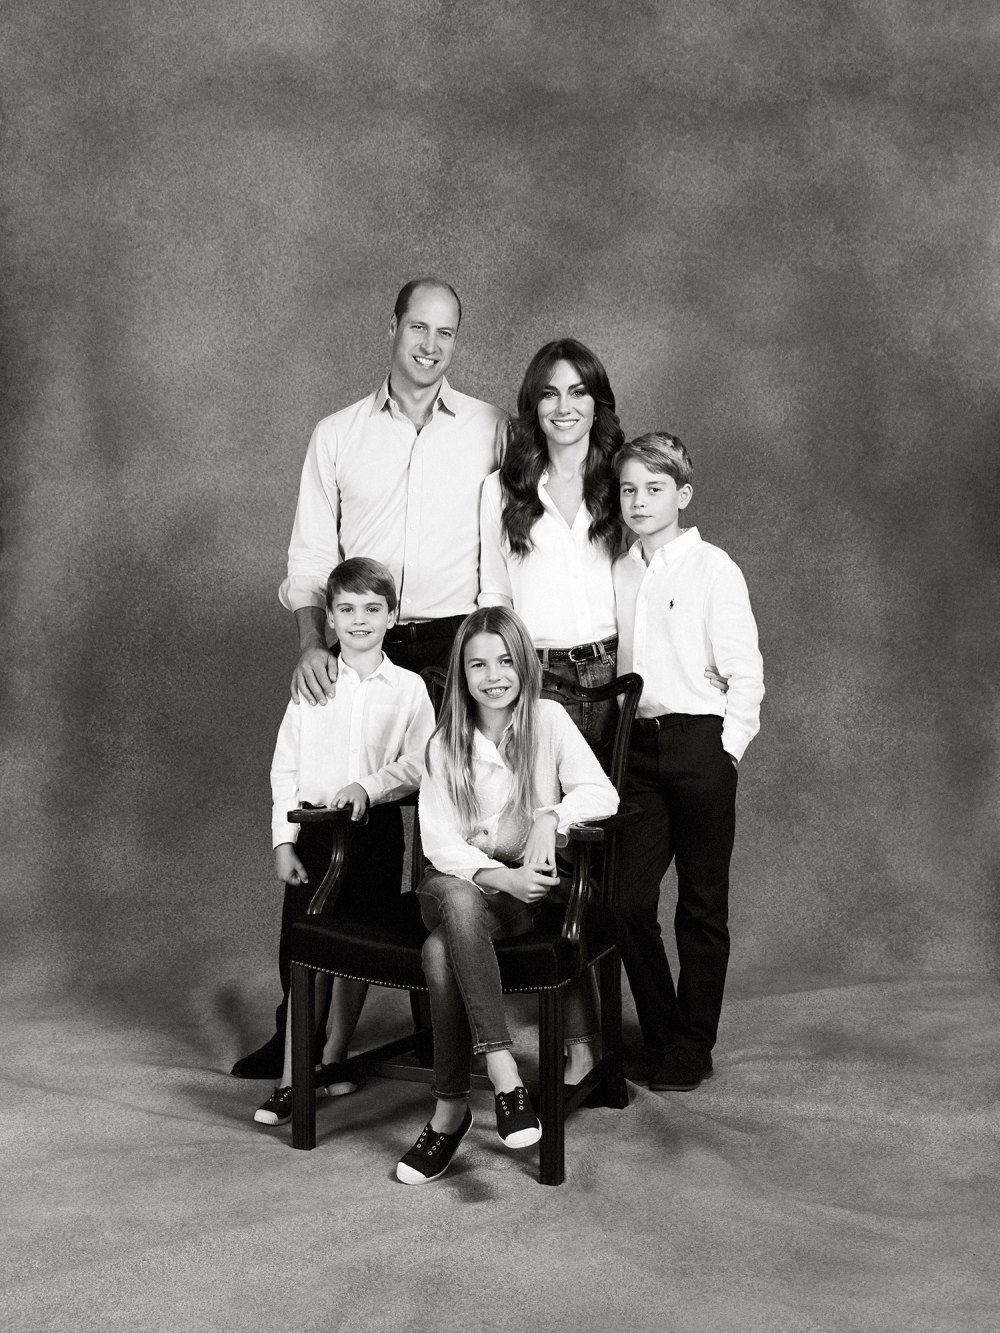 Prince William and Kate Middleton's 3 Kids Look All Grown Up in 2023 Christmas Card Portrait